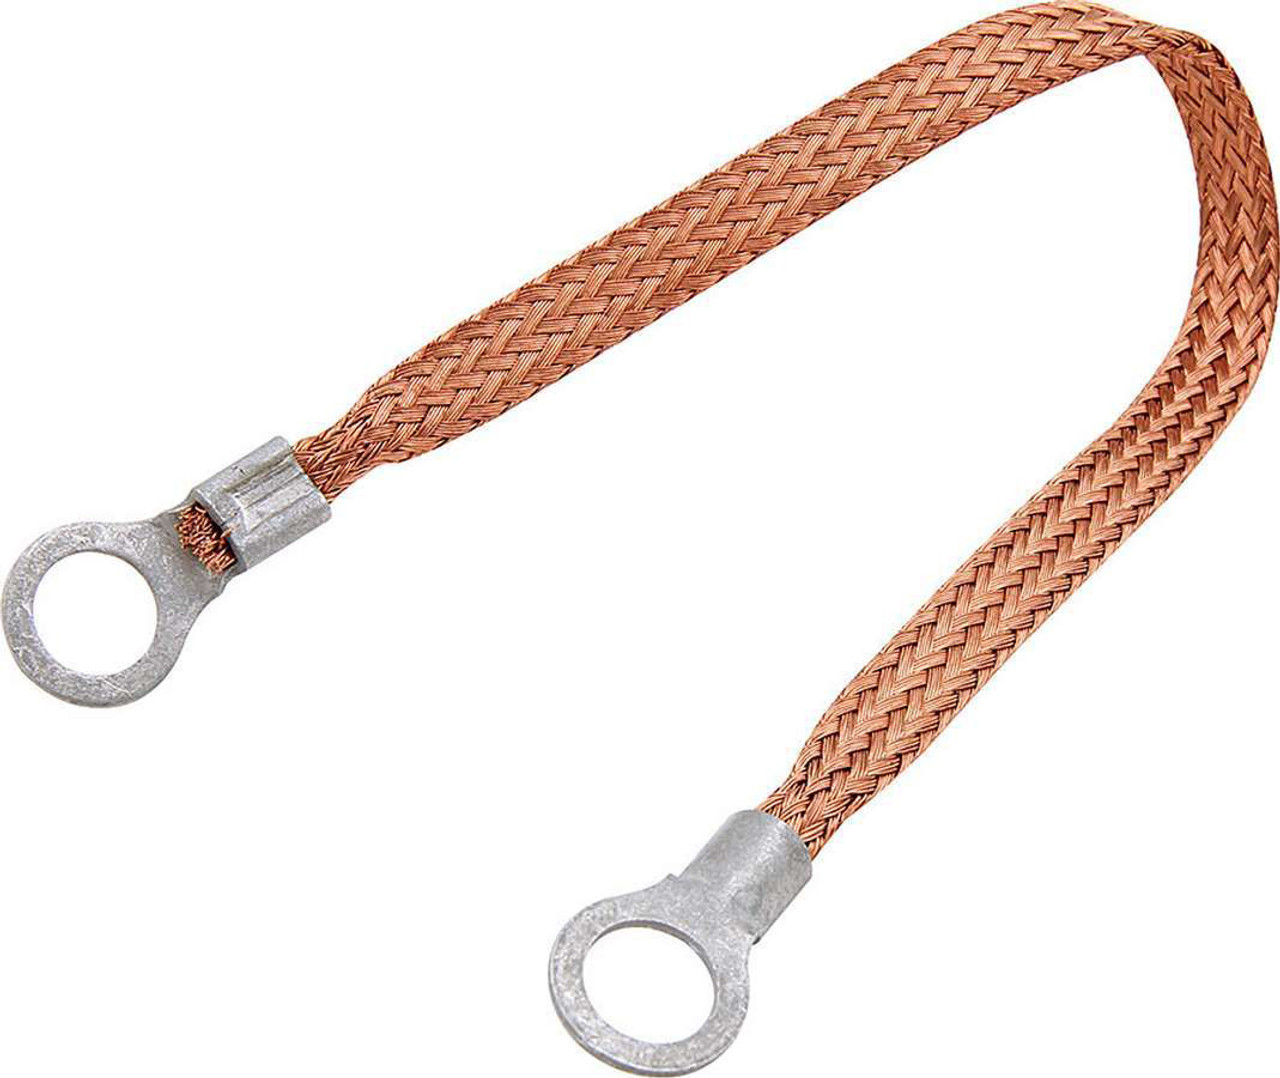 Copper Ground Strap 18in w/ 3/8in Ring Terminals